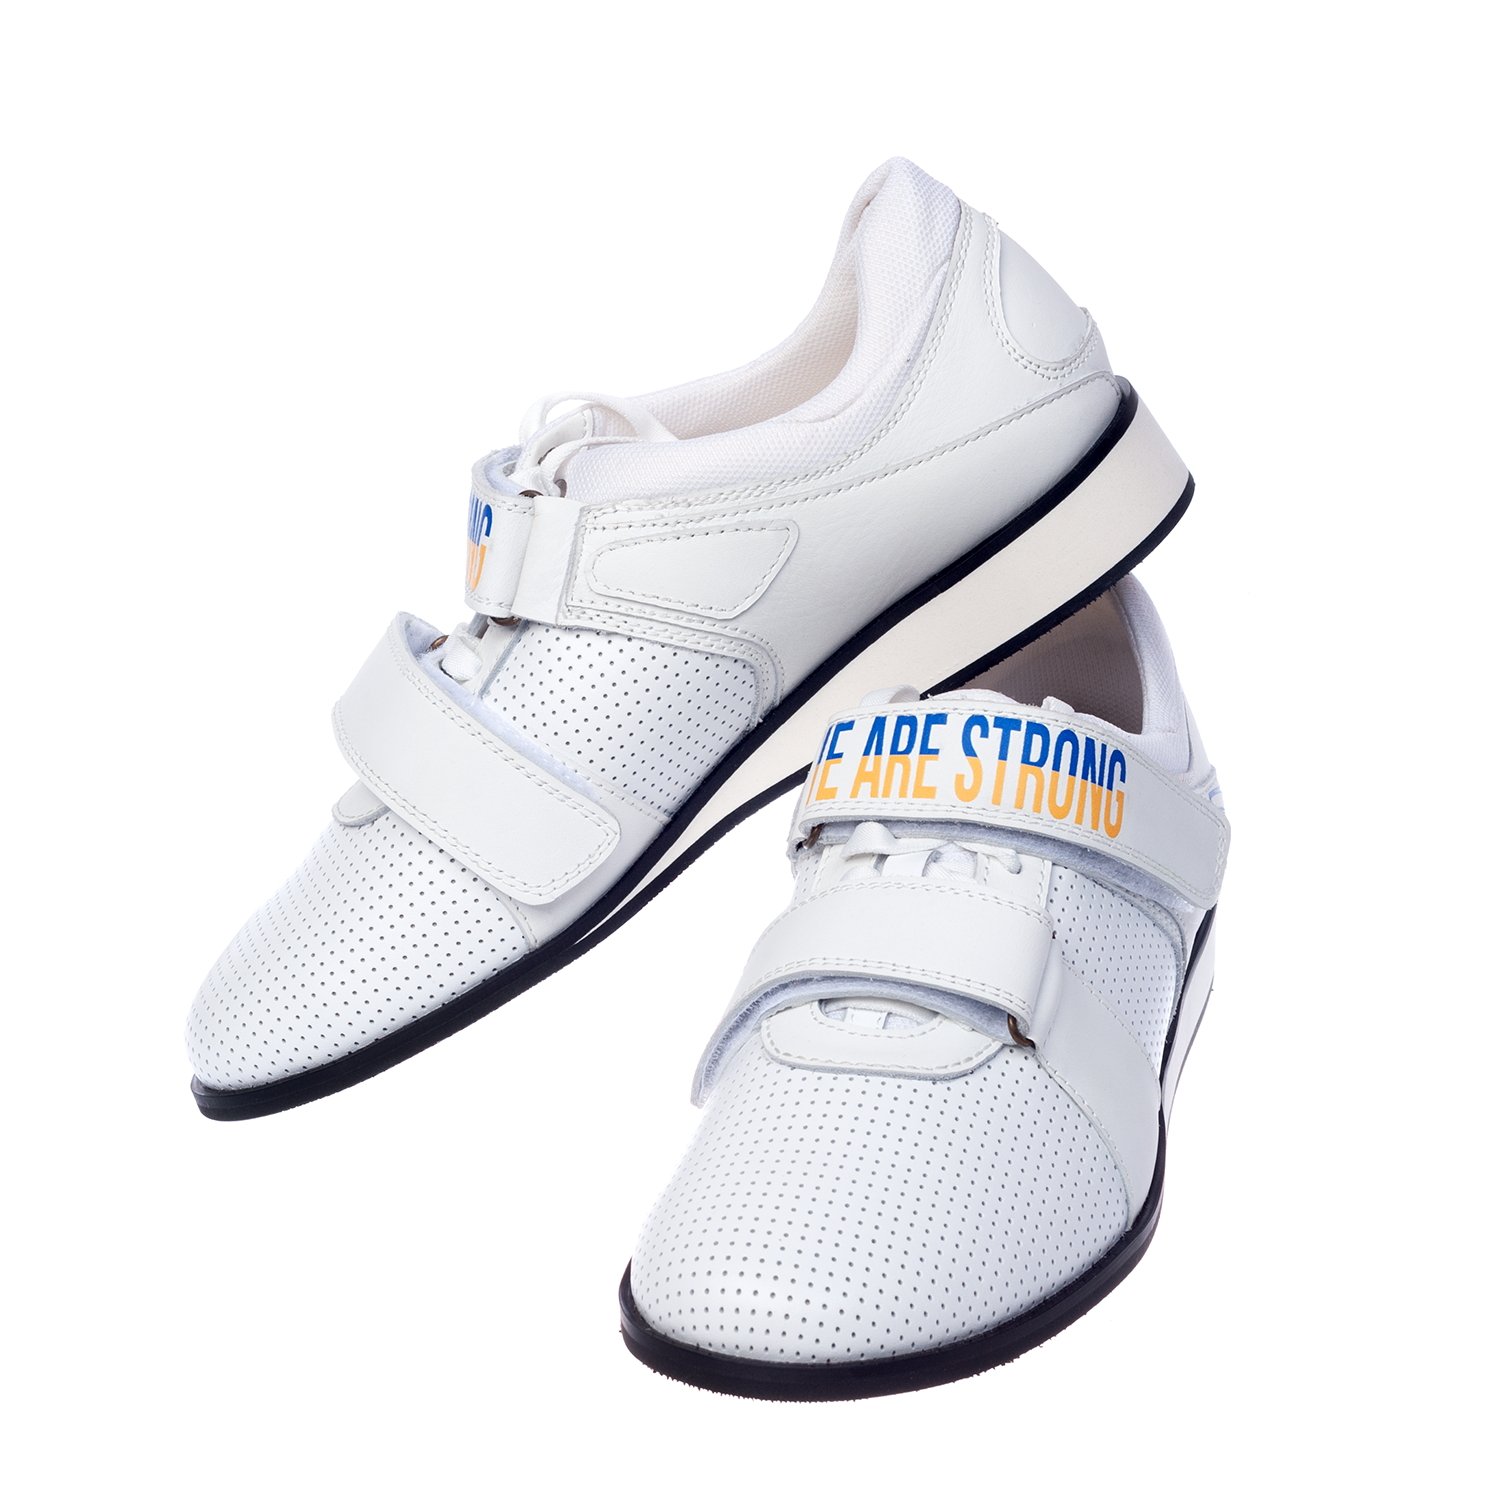 Weightlifting shoes We are strong, white, size 38 (UKR)